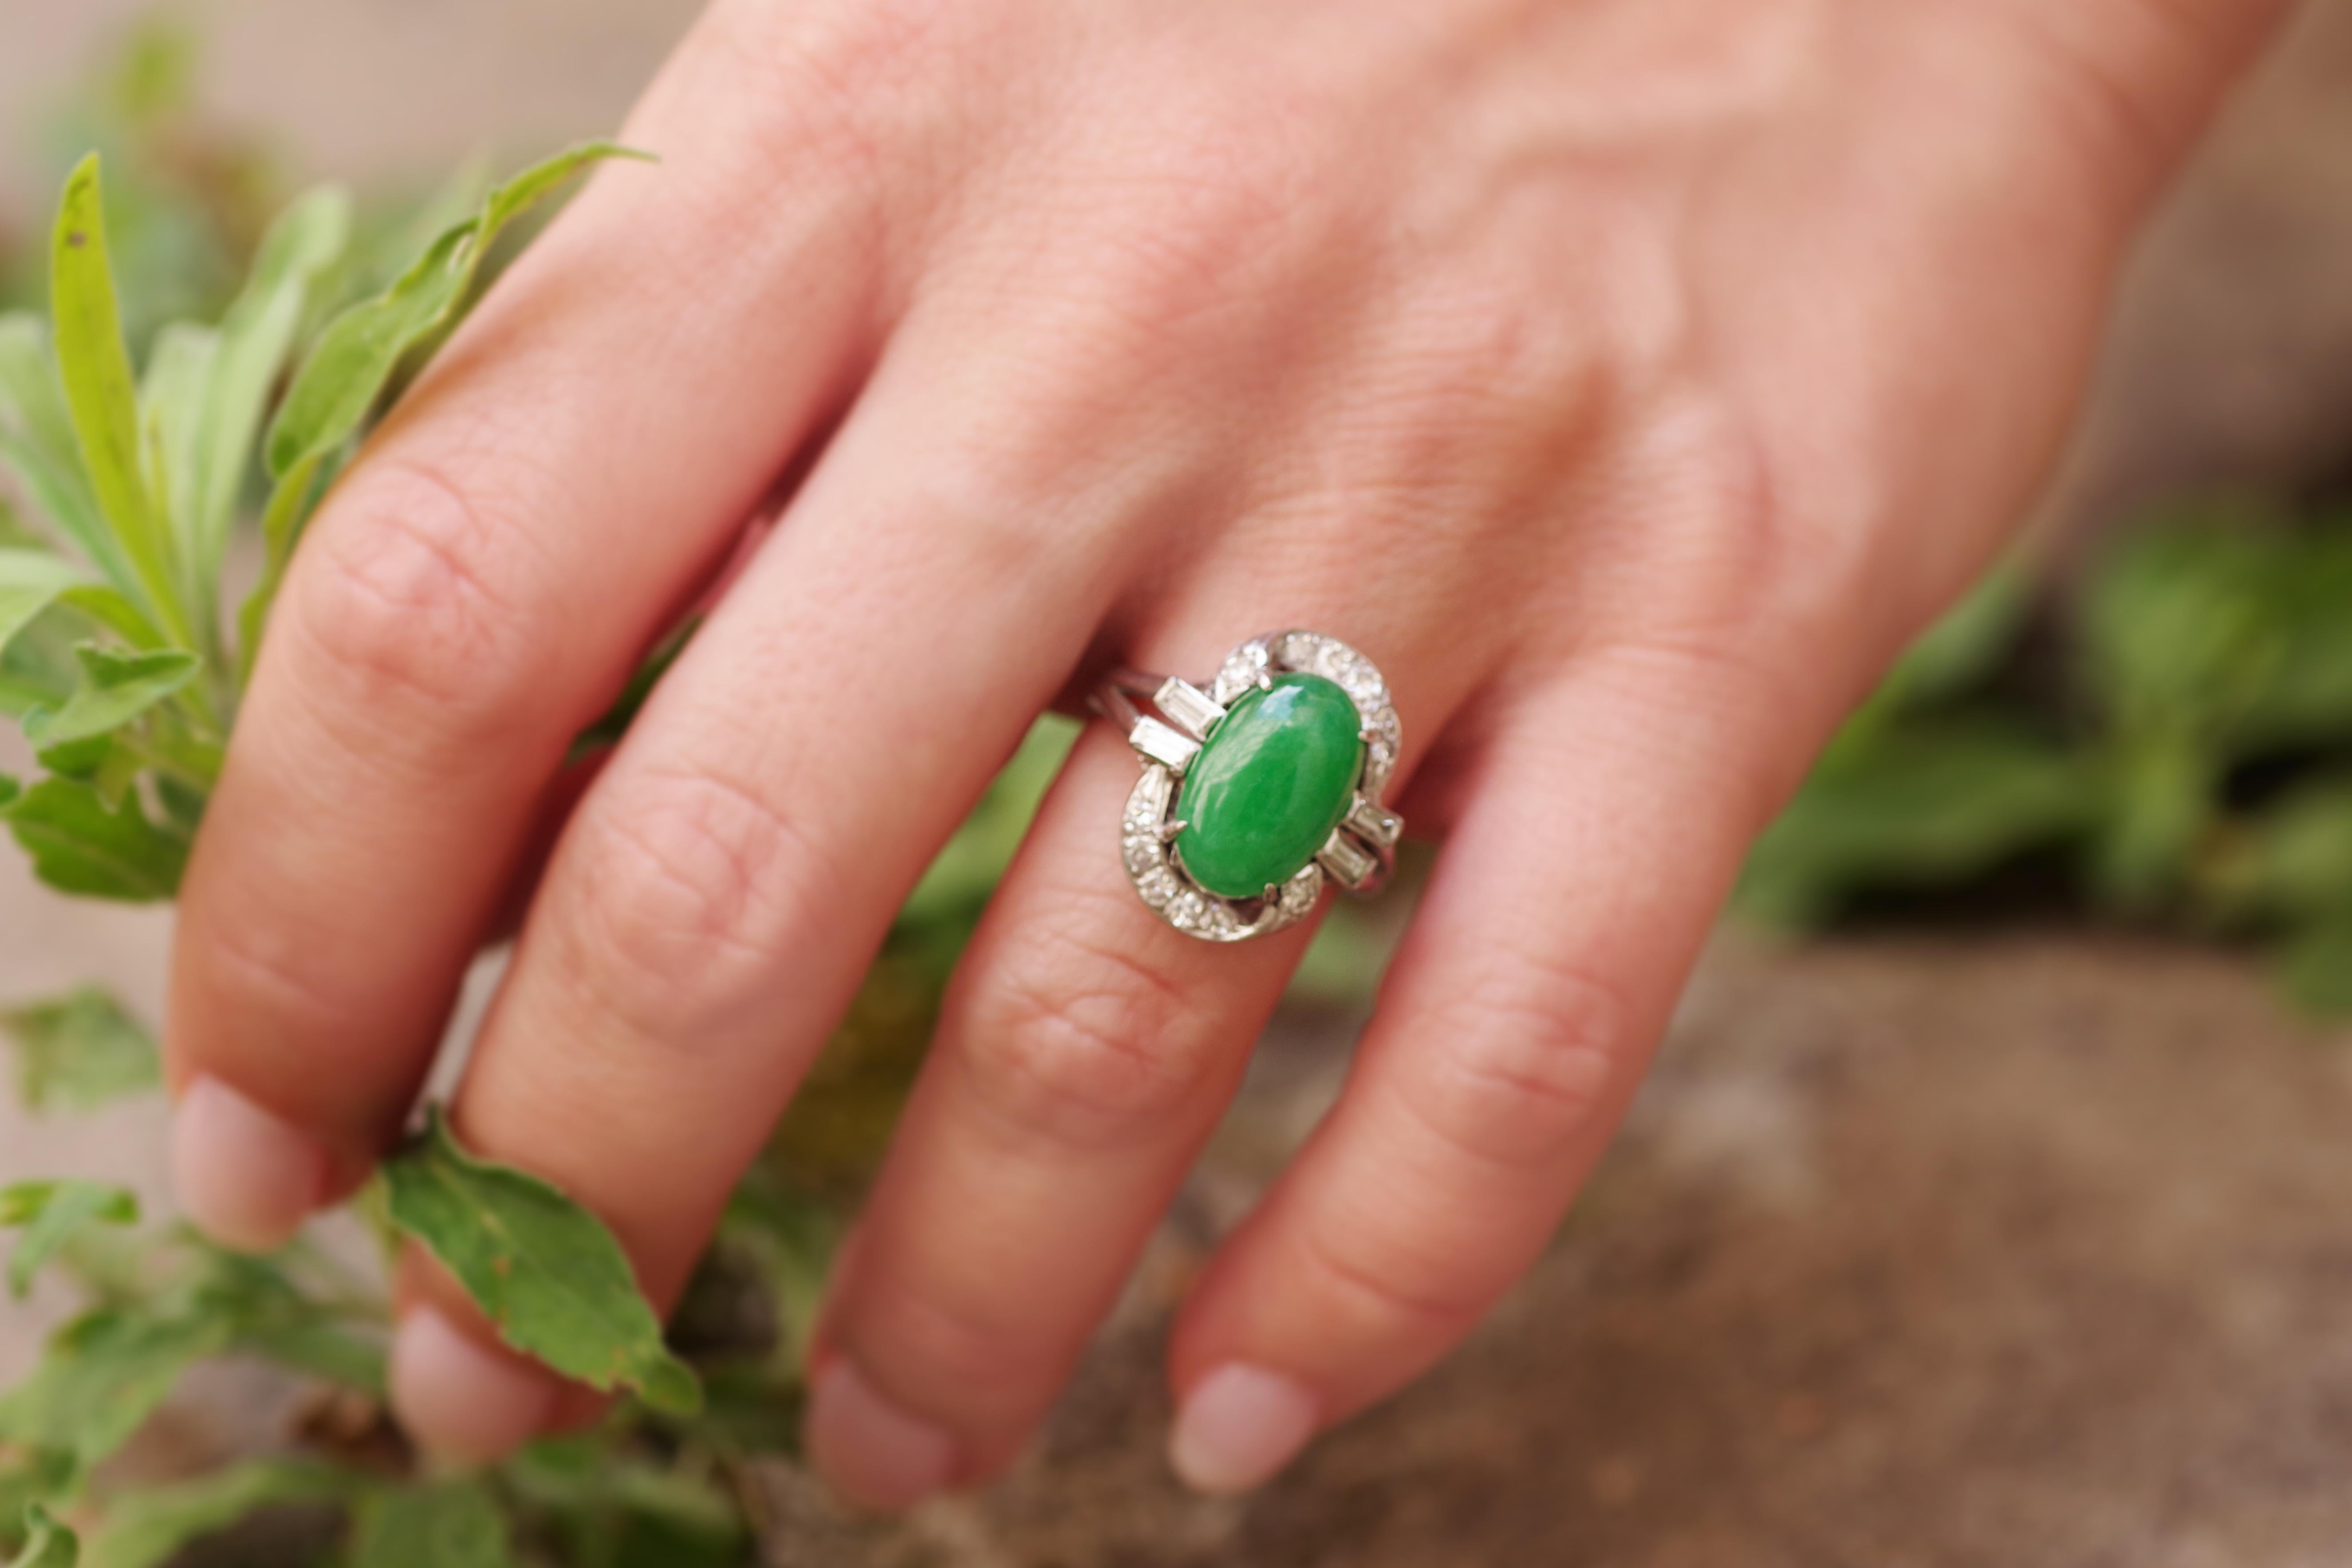 Art Deco Jade diamond ring in 14 karat white gold. Elegant ring set with an oval cabochon of jade jadeite of a beautiful intense green colour with slightly white veins. The gem is set with four claws and surrounded by twelve single-cut diamonds on a